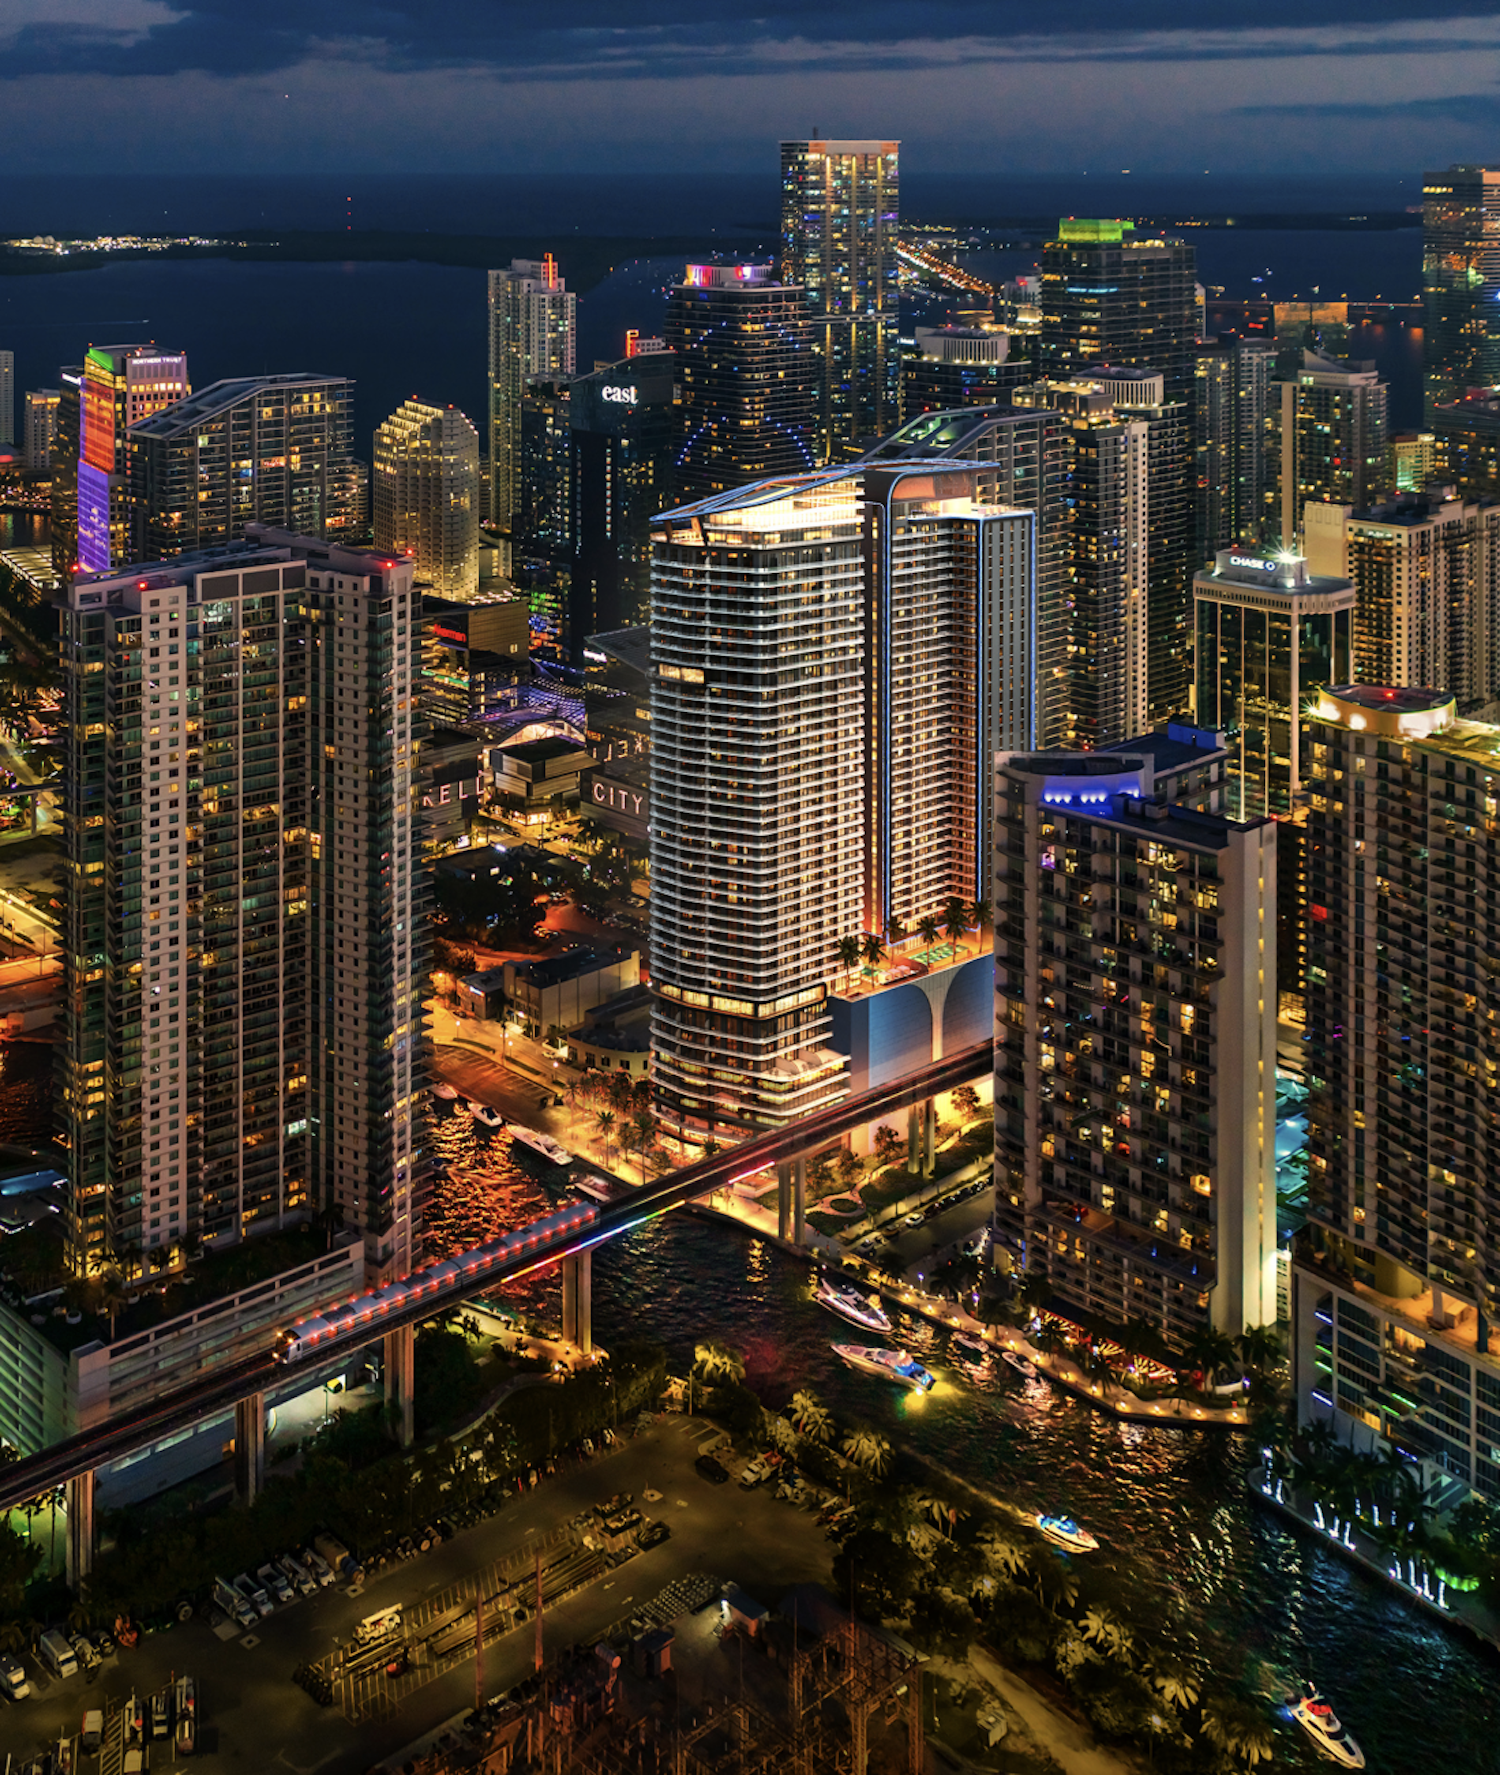 Completed Plans Submitted for the Two Tower Development One Brickell  Riverfront